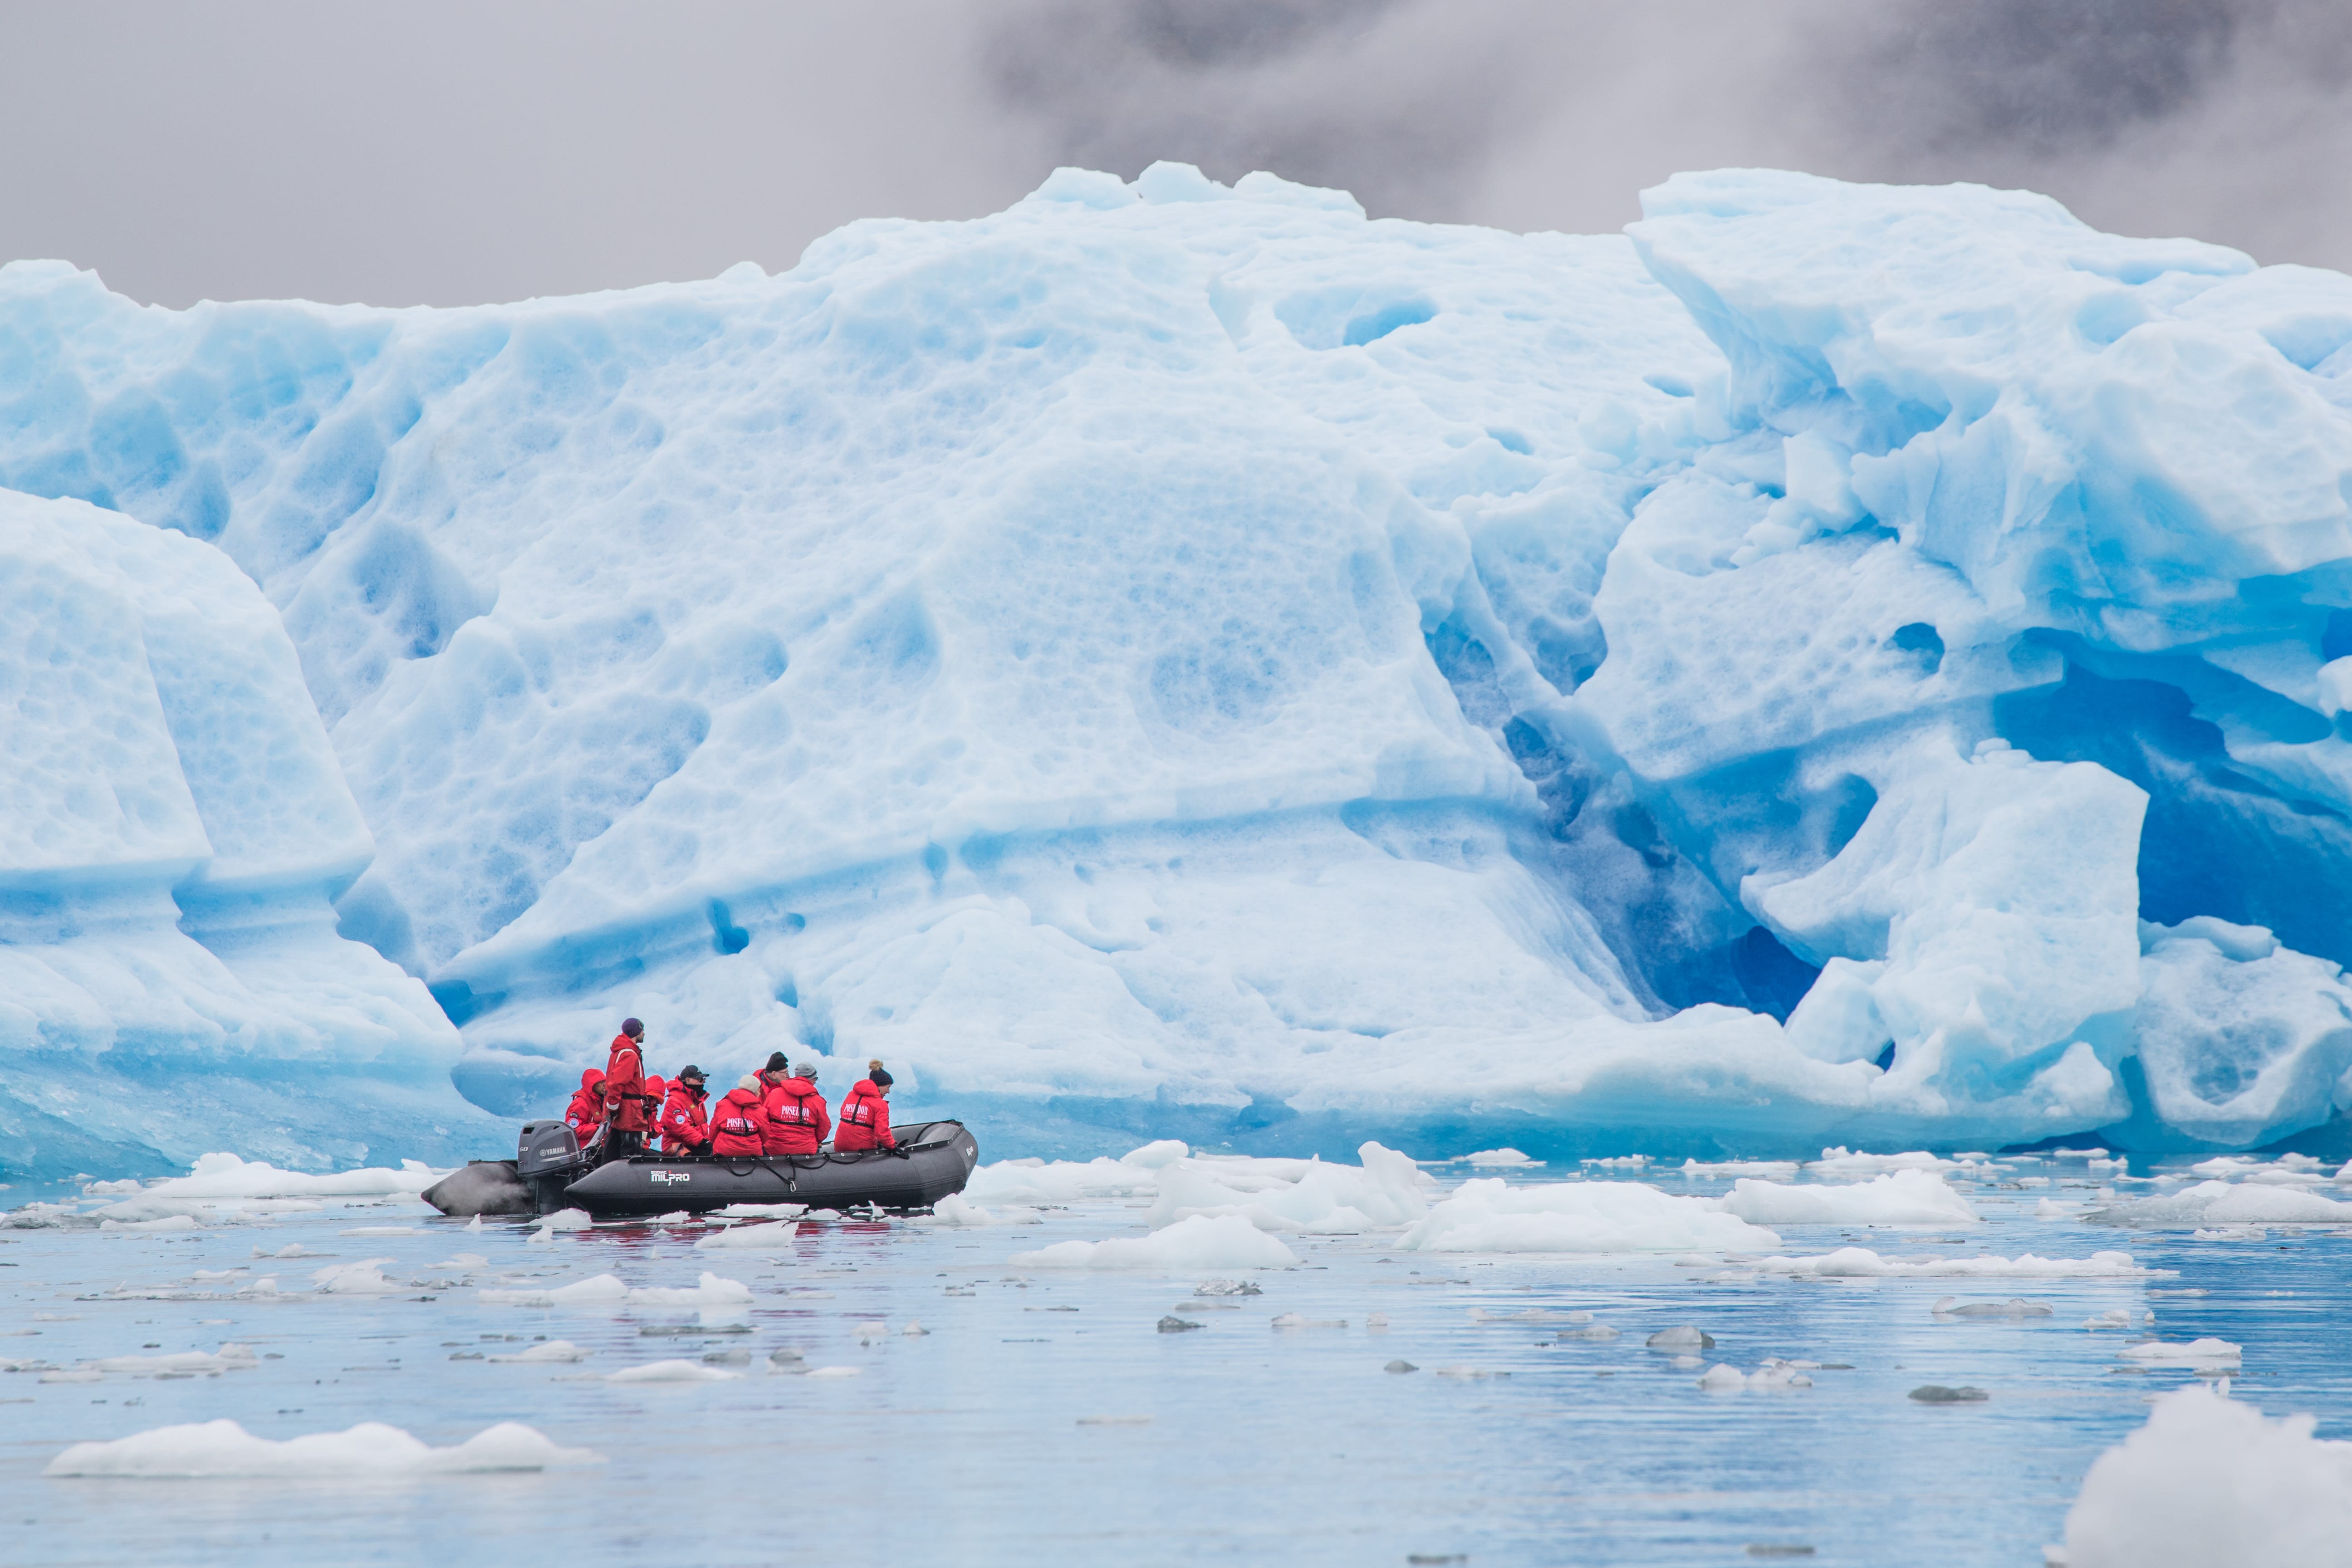 Expedition cruising among icebergs by Zodiac